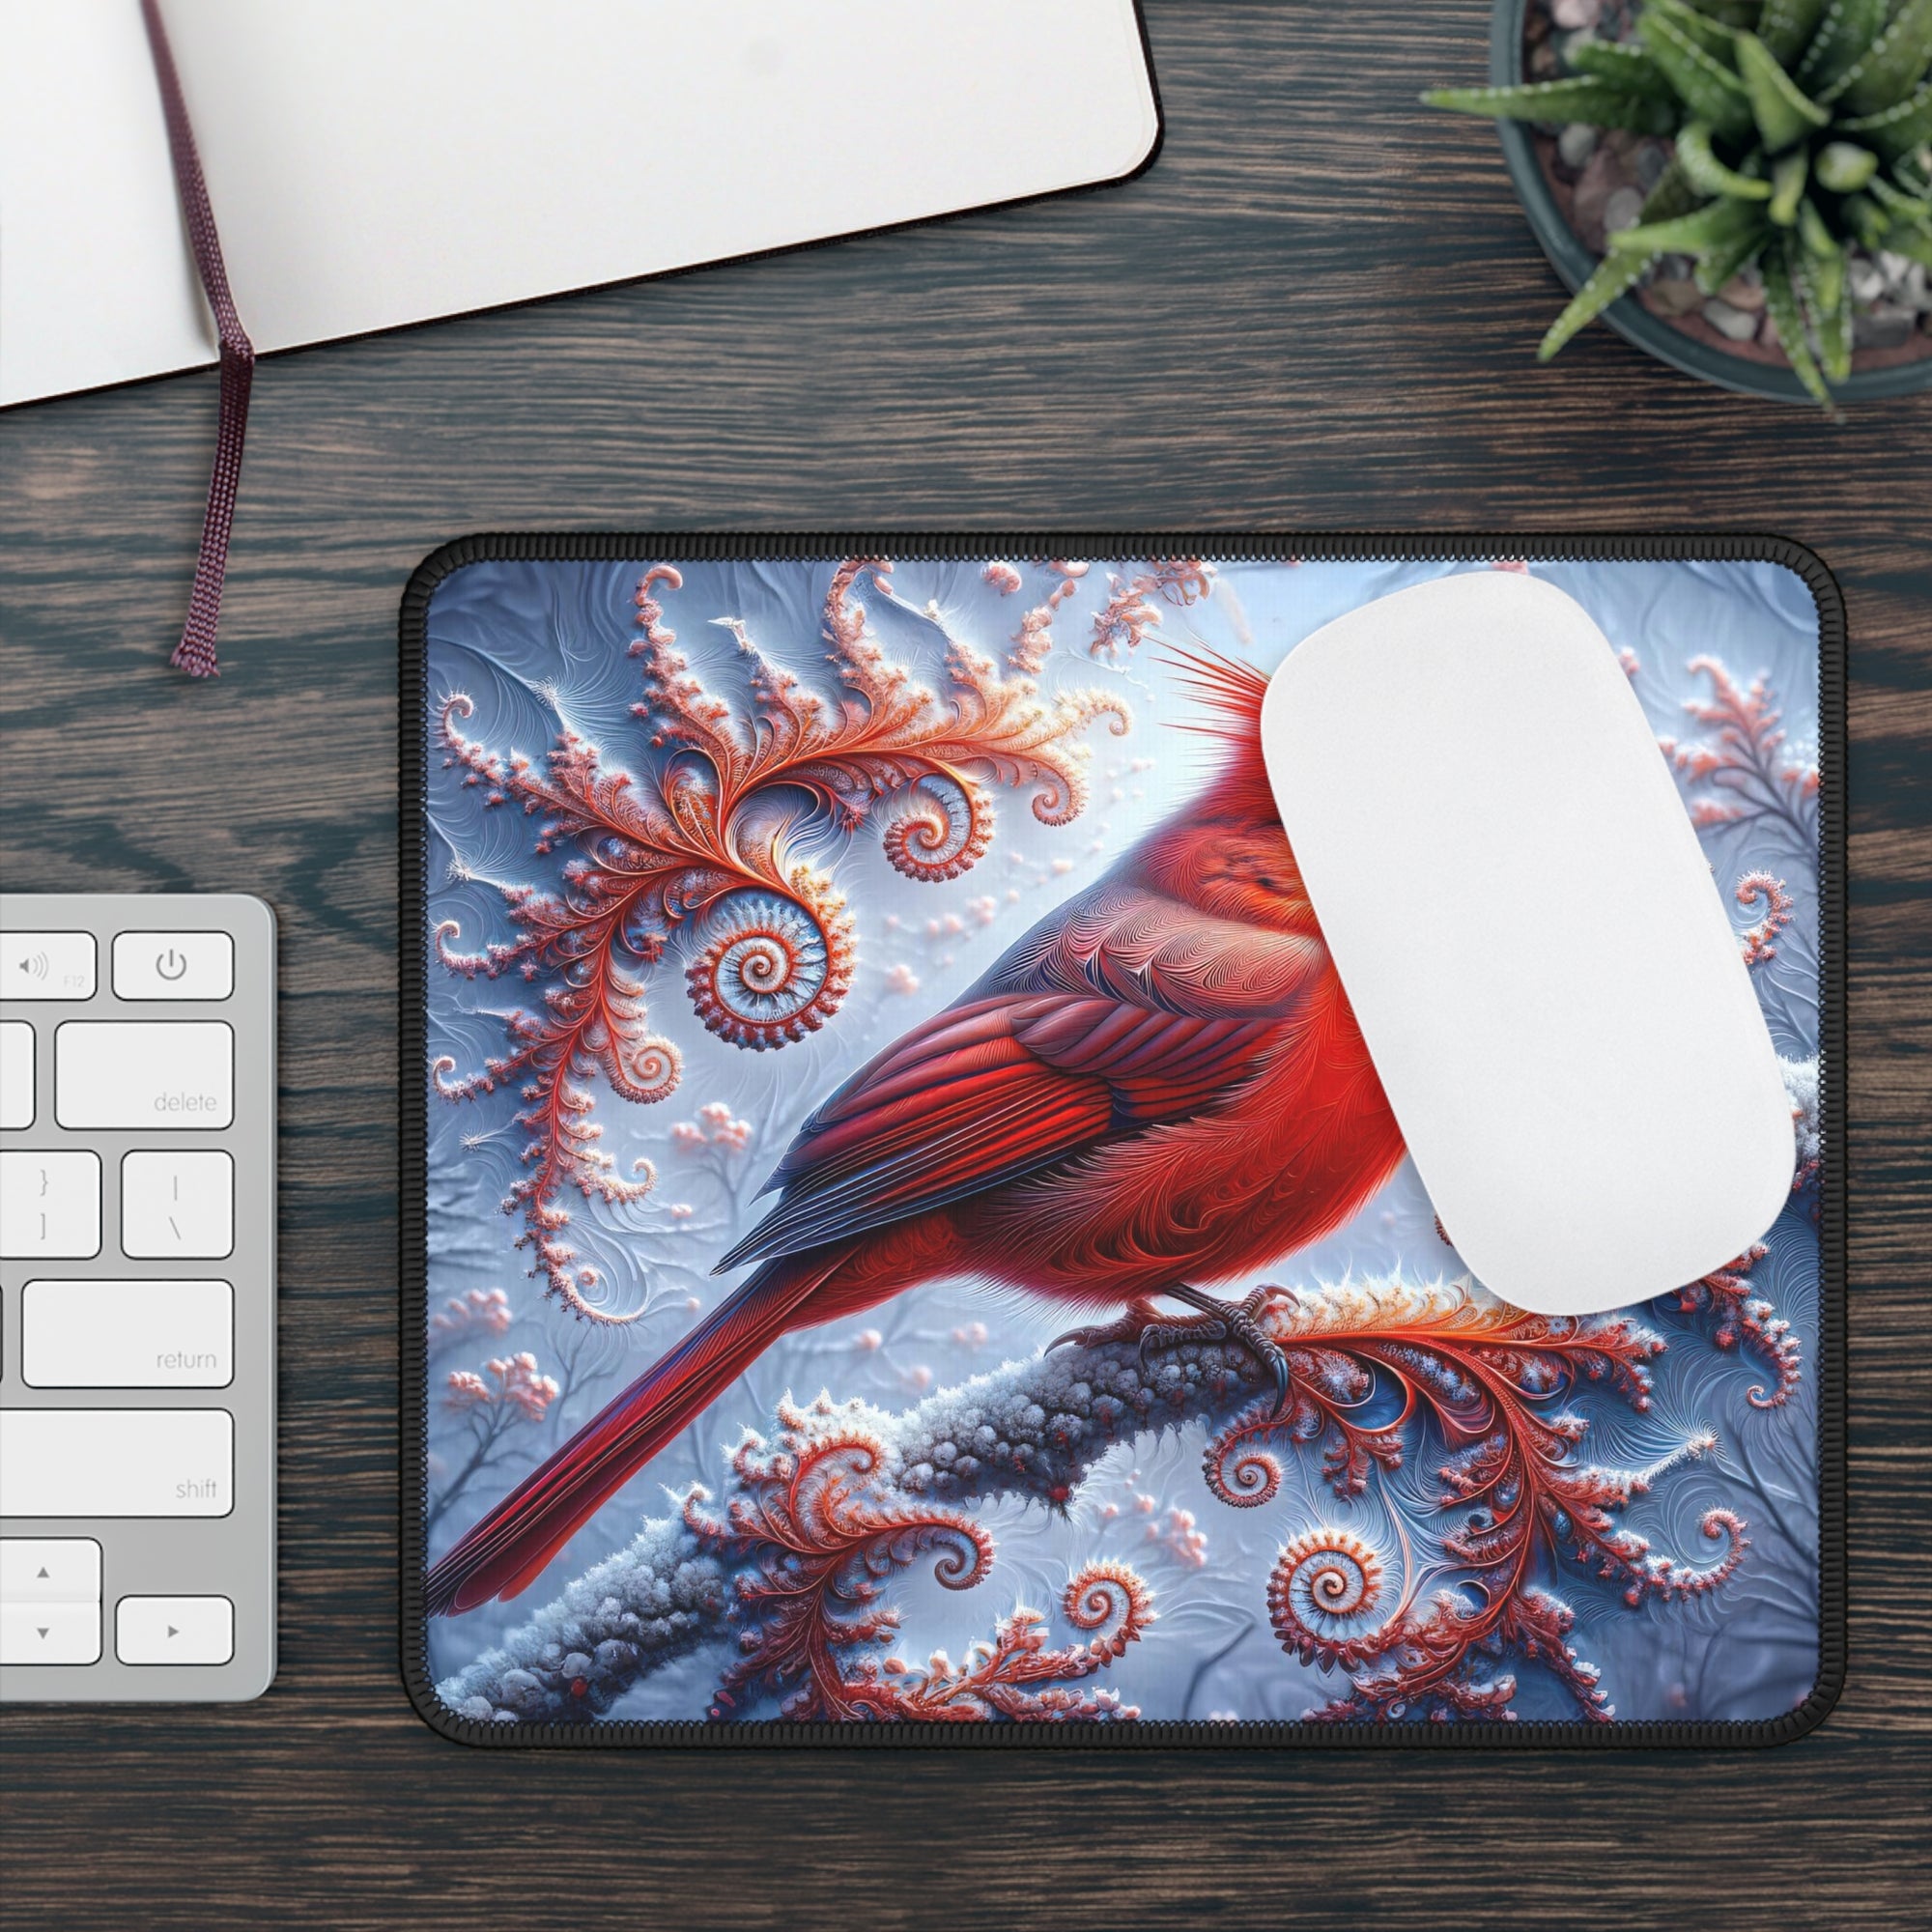 The Cardinal's Fractal Winter Gaming Mouse Pad